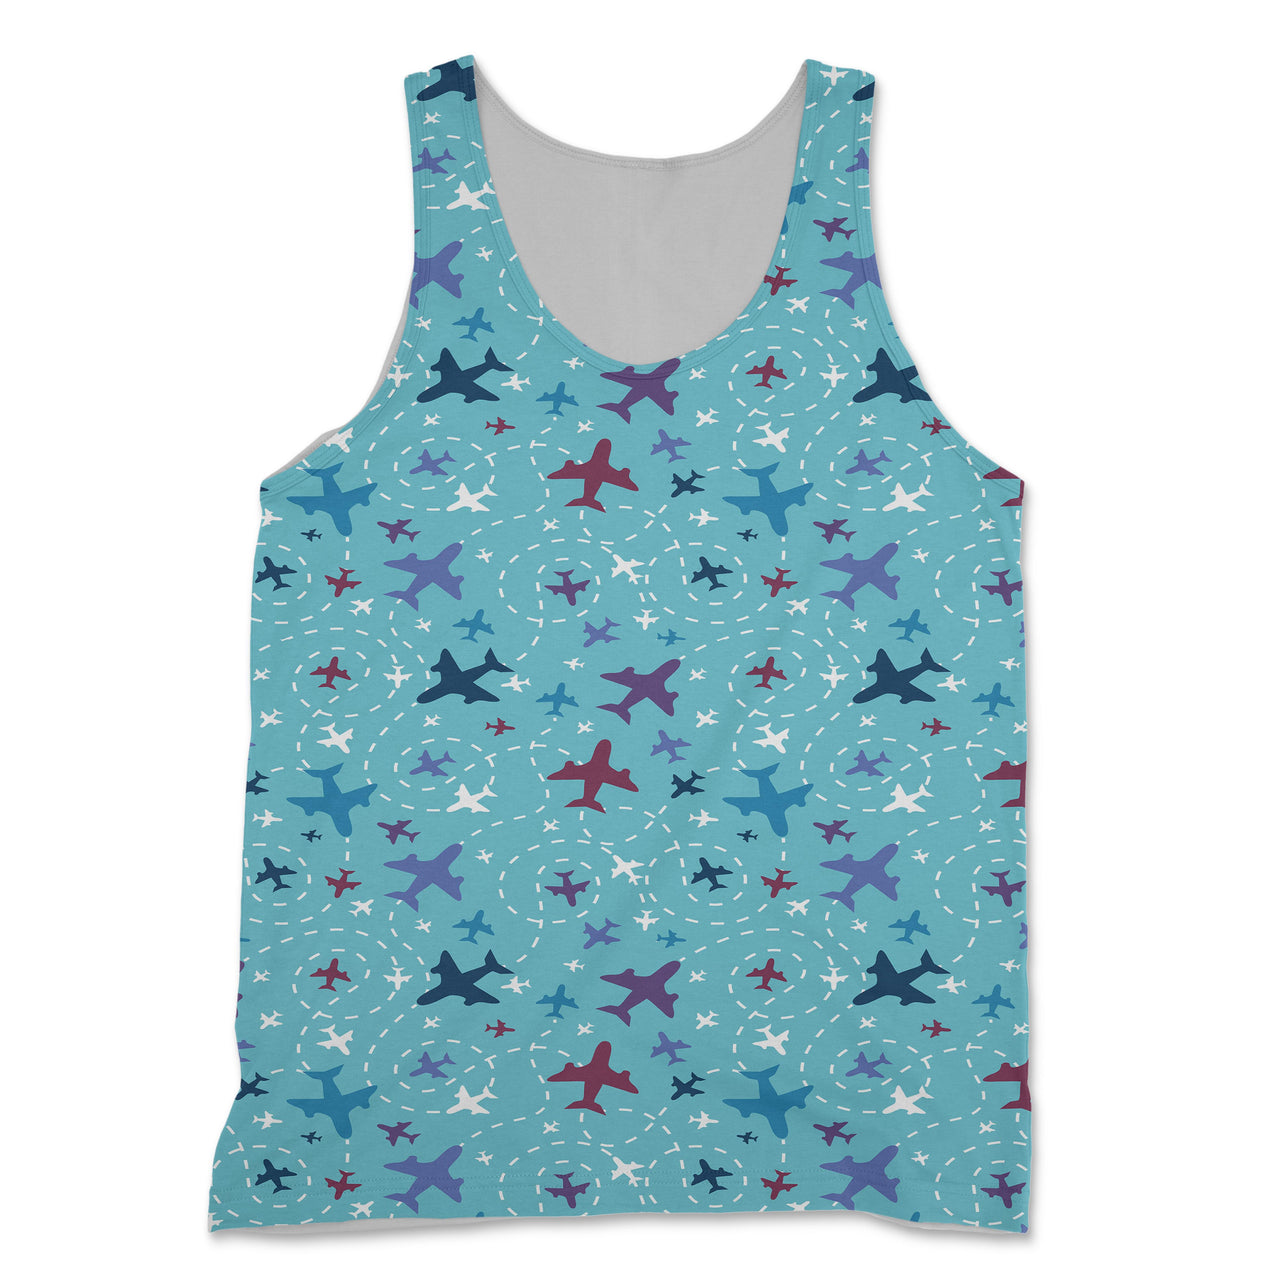 Love of Travel with Aircraft Designed 3D Tank Tops